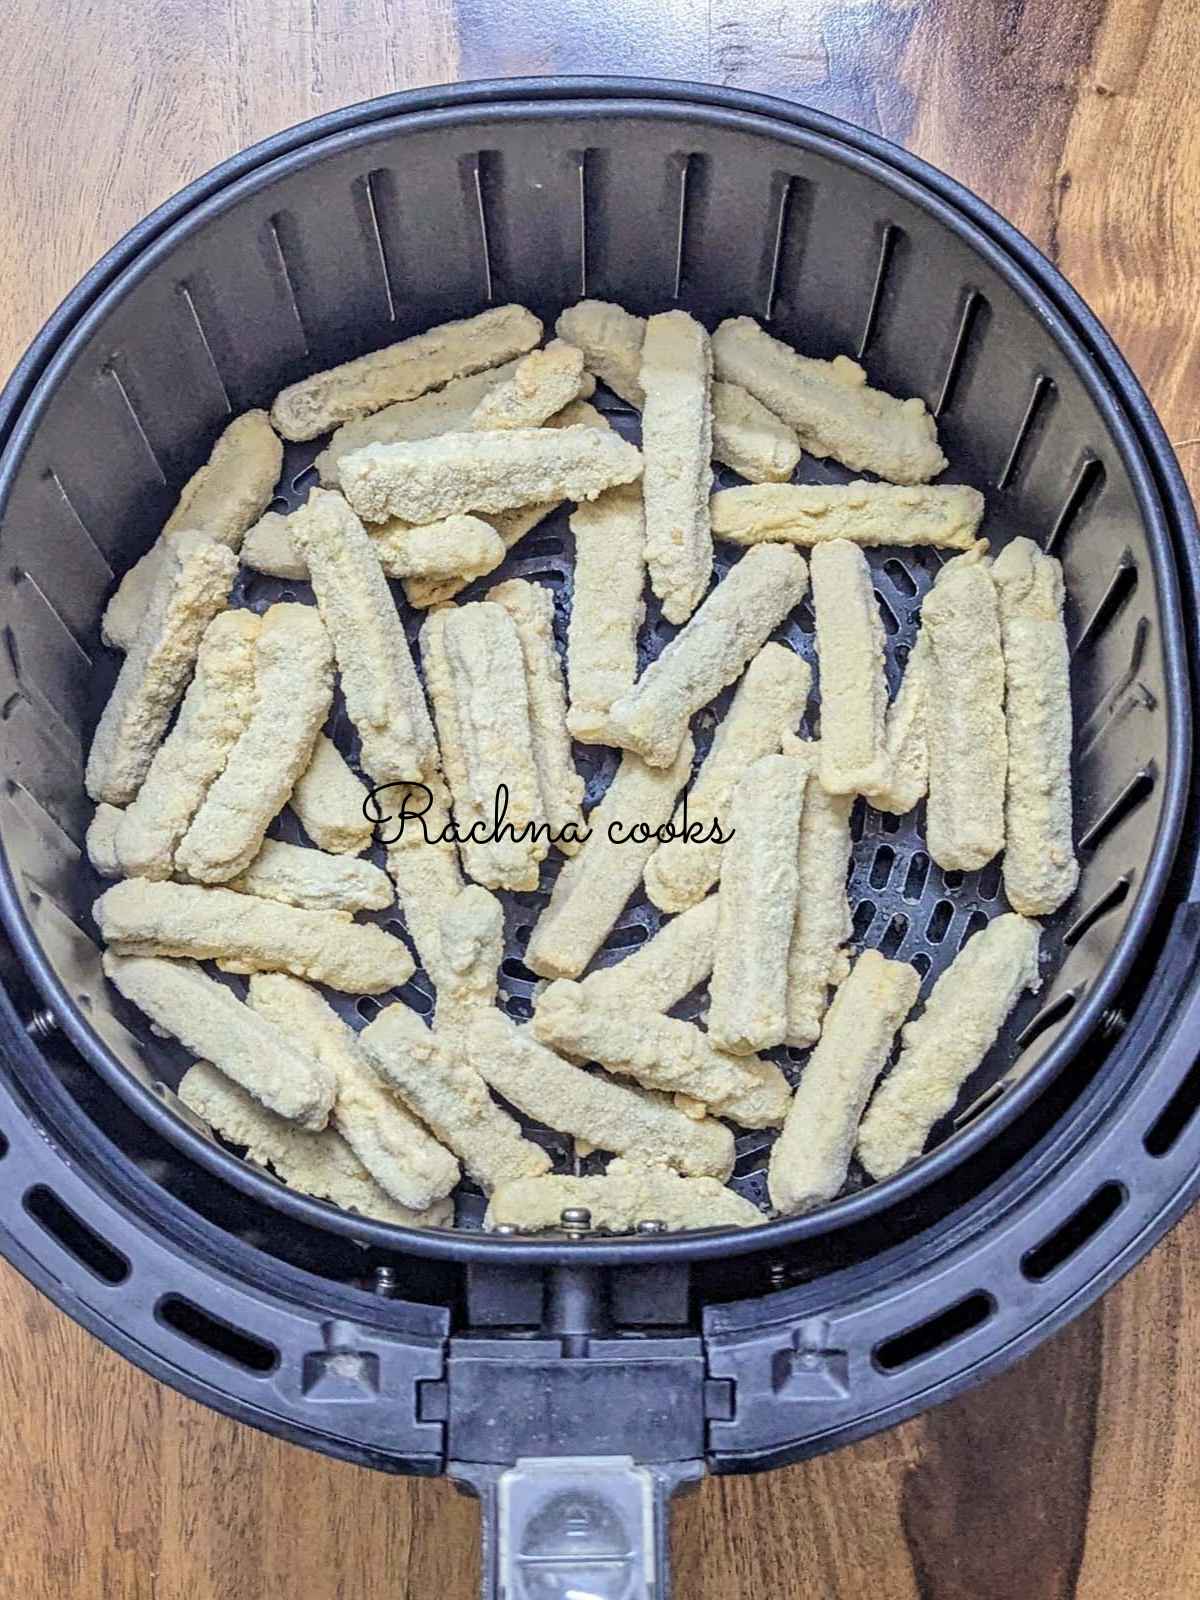 Frozen chicken fries in air fryer basket ready for air frying.